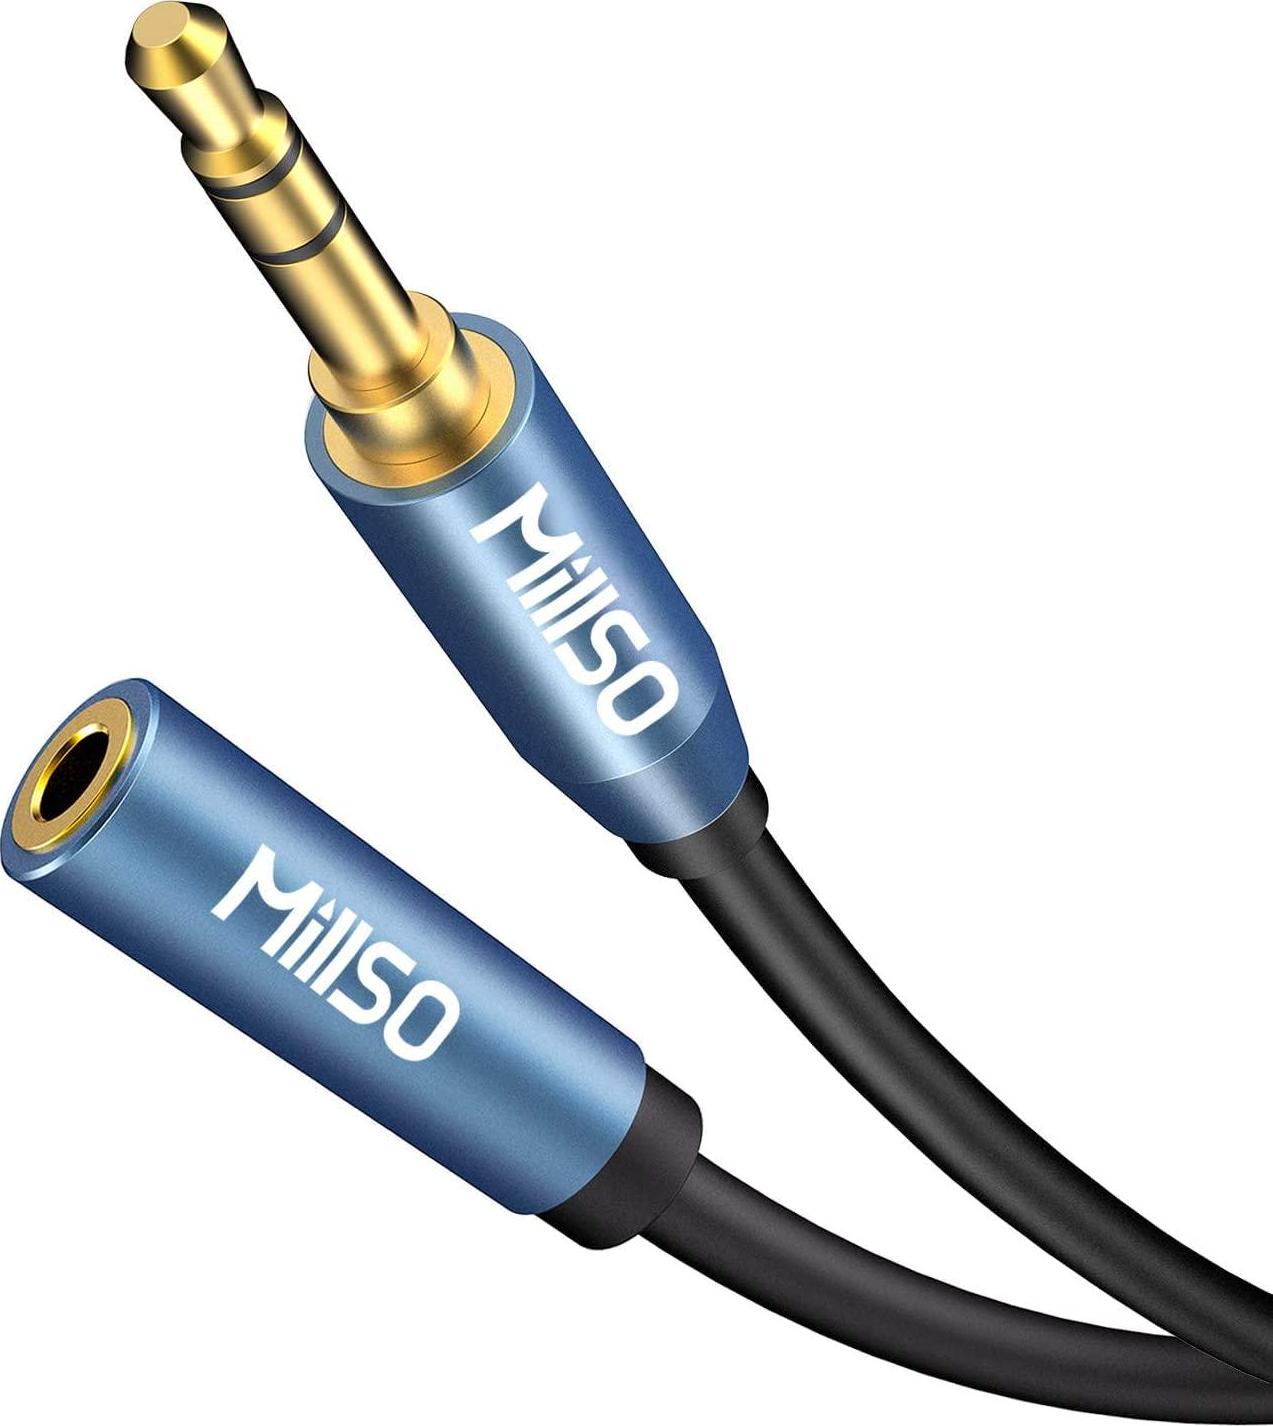 MillSO, MillSO Auxiliary Cable Extension Adapter 3.5mm Male to Female for Headphones or Speakers to Car, PCs, Smartphones, Tablets and Media Players-6.6ft/2M